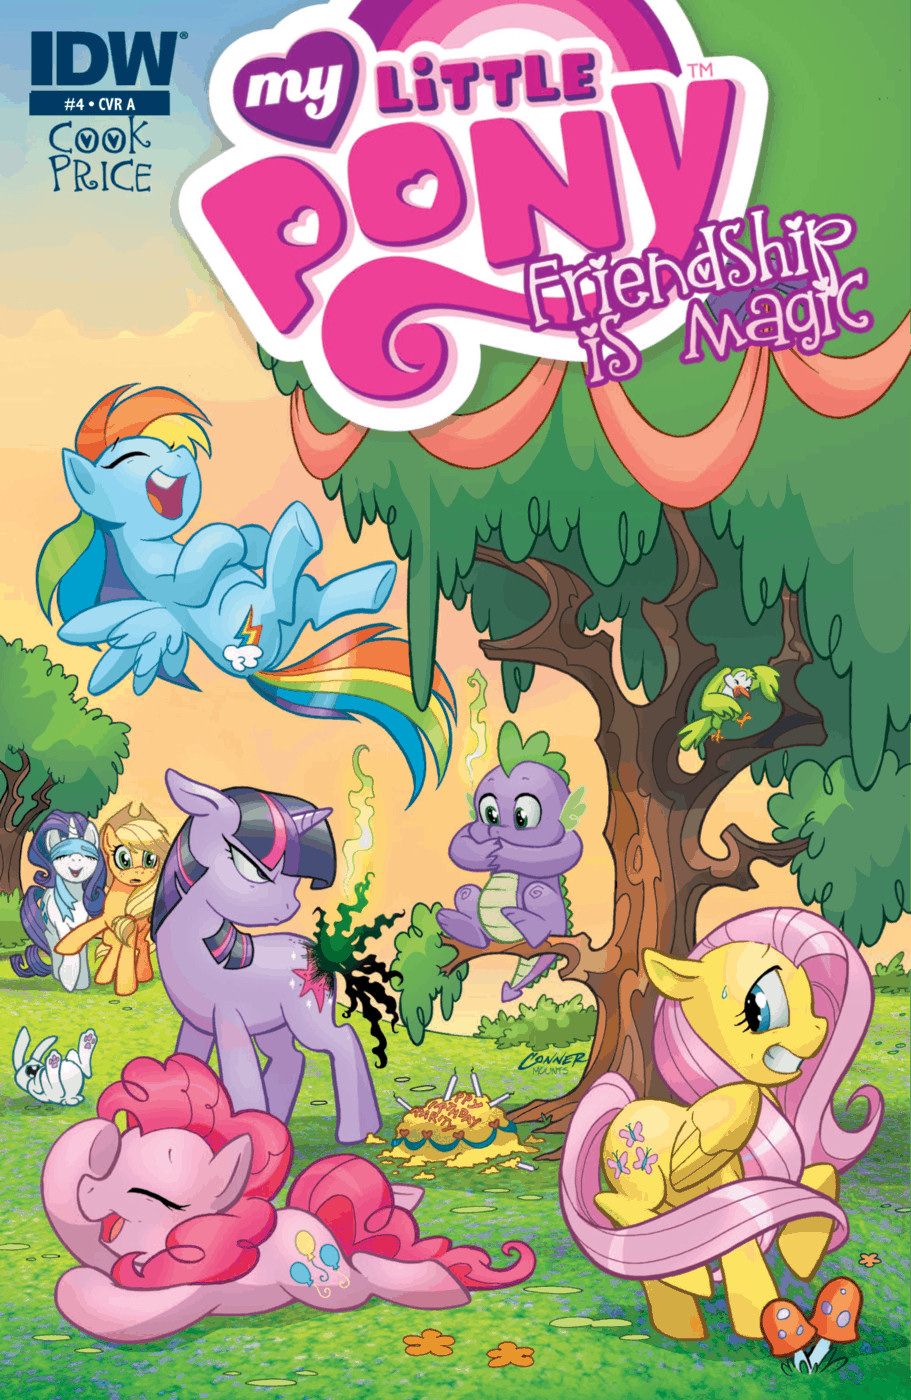 Read online My Little Pony: Friendship is Magic comic -  Issue #4 - 1